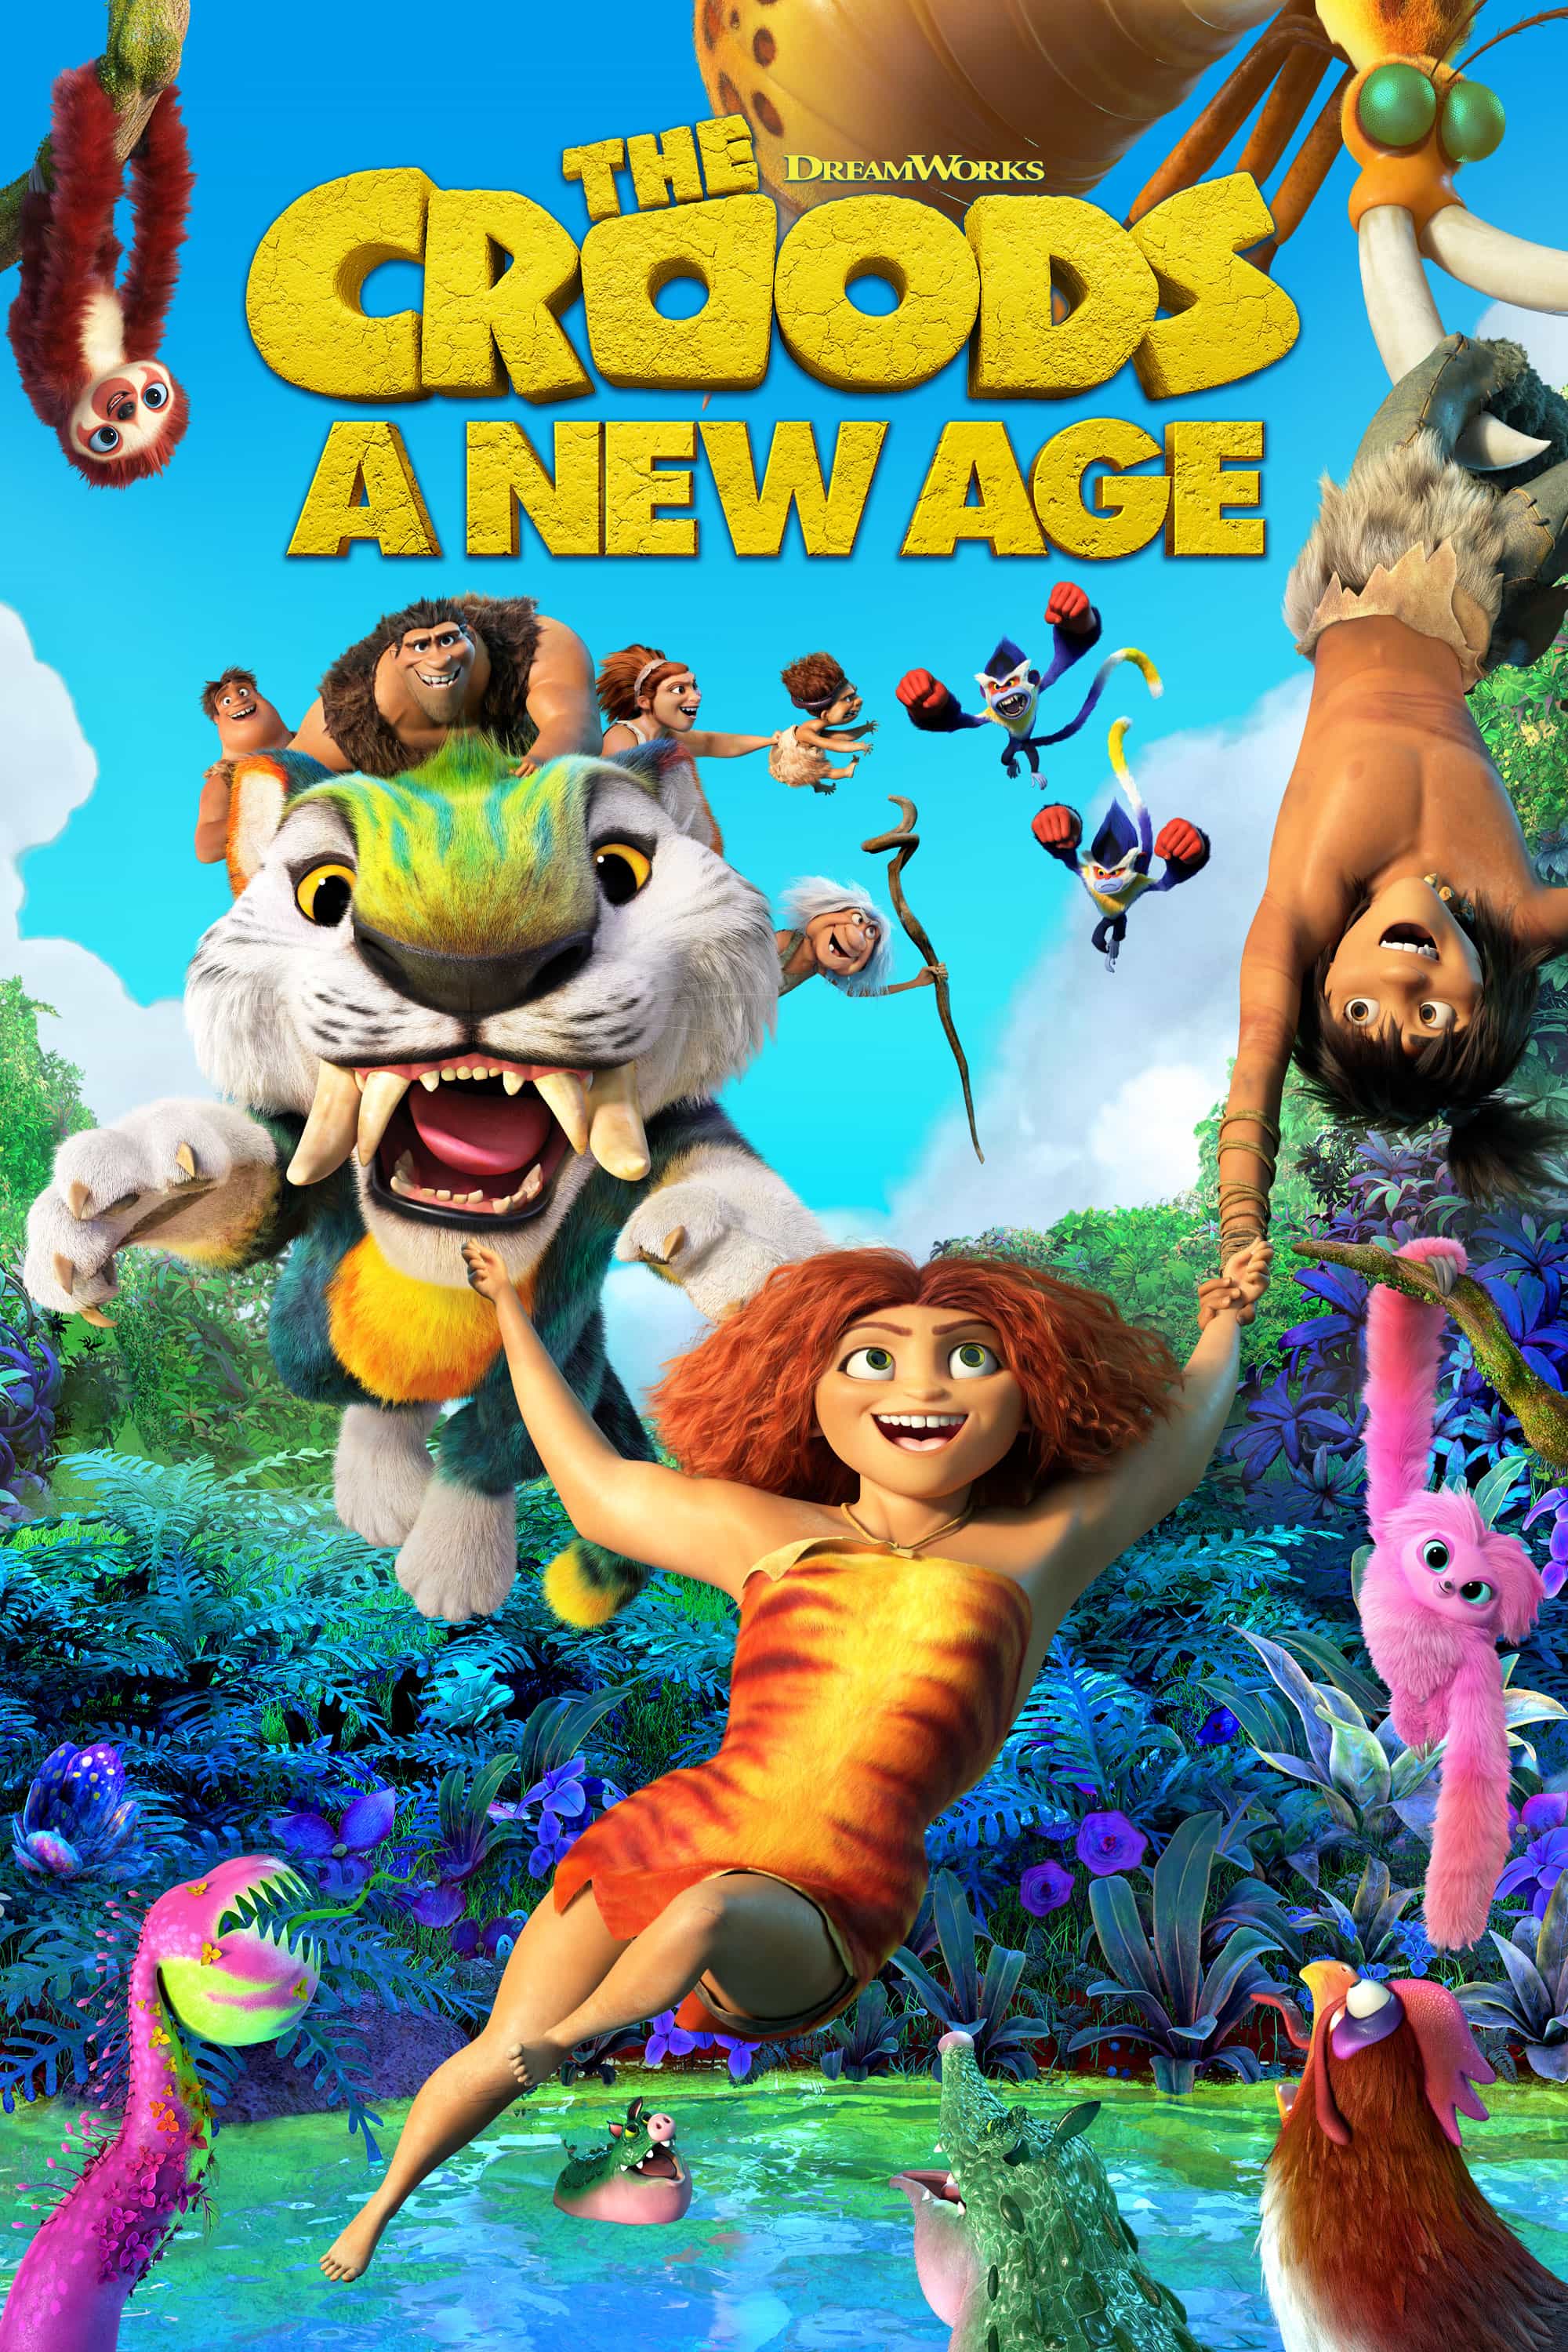 New movie preview, UK releases weekend Friday 16th July 2021 - The Croods: A New Age, Space Jam: A New Legacy and The Forever Purge to name a few